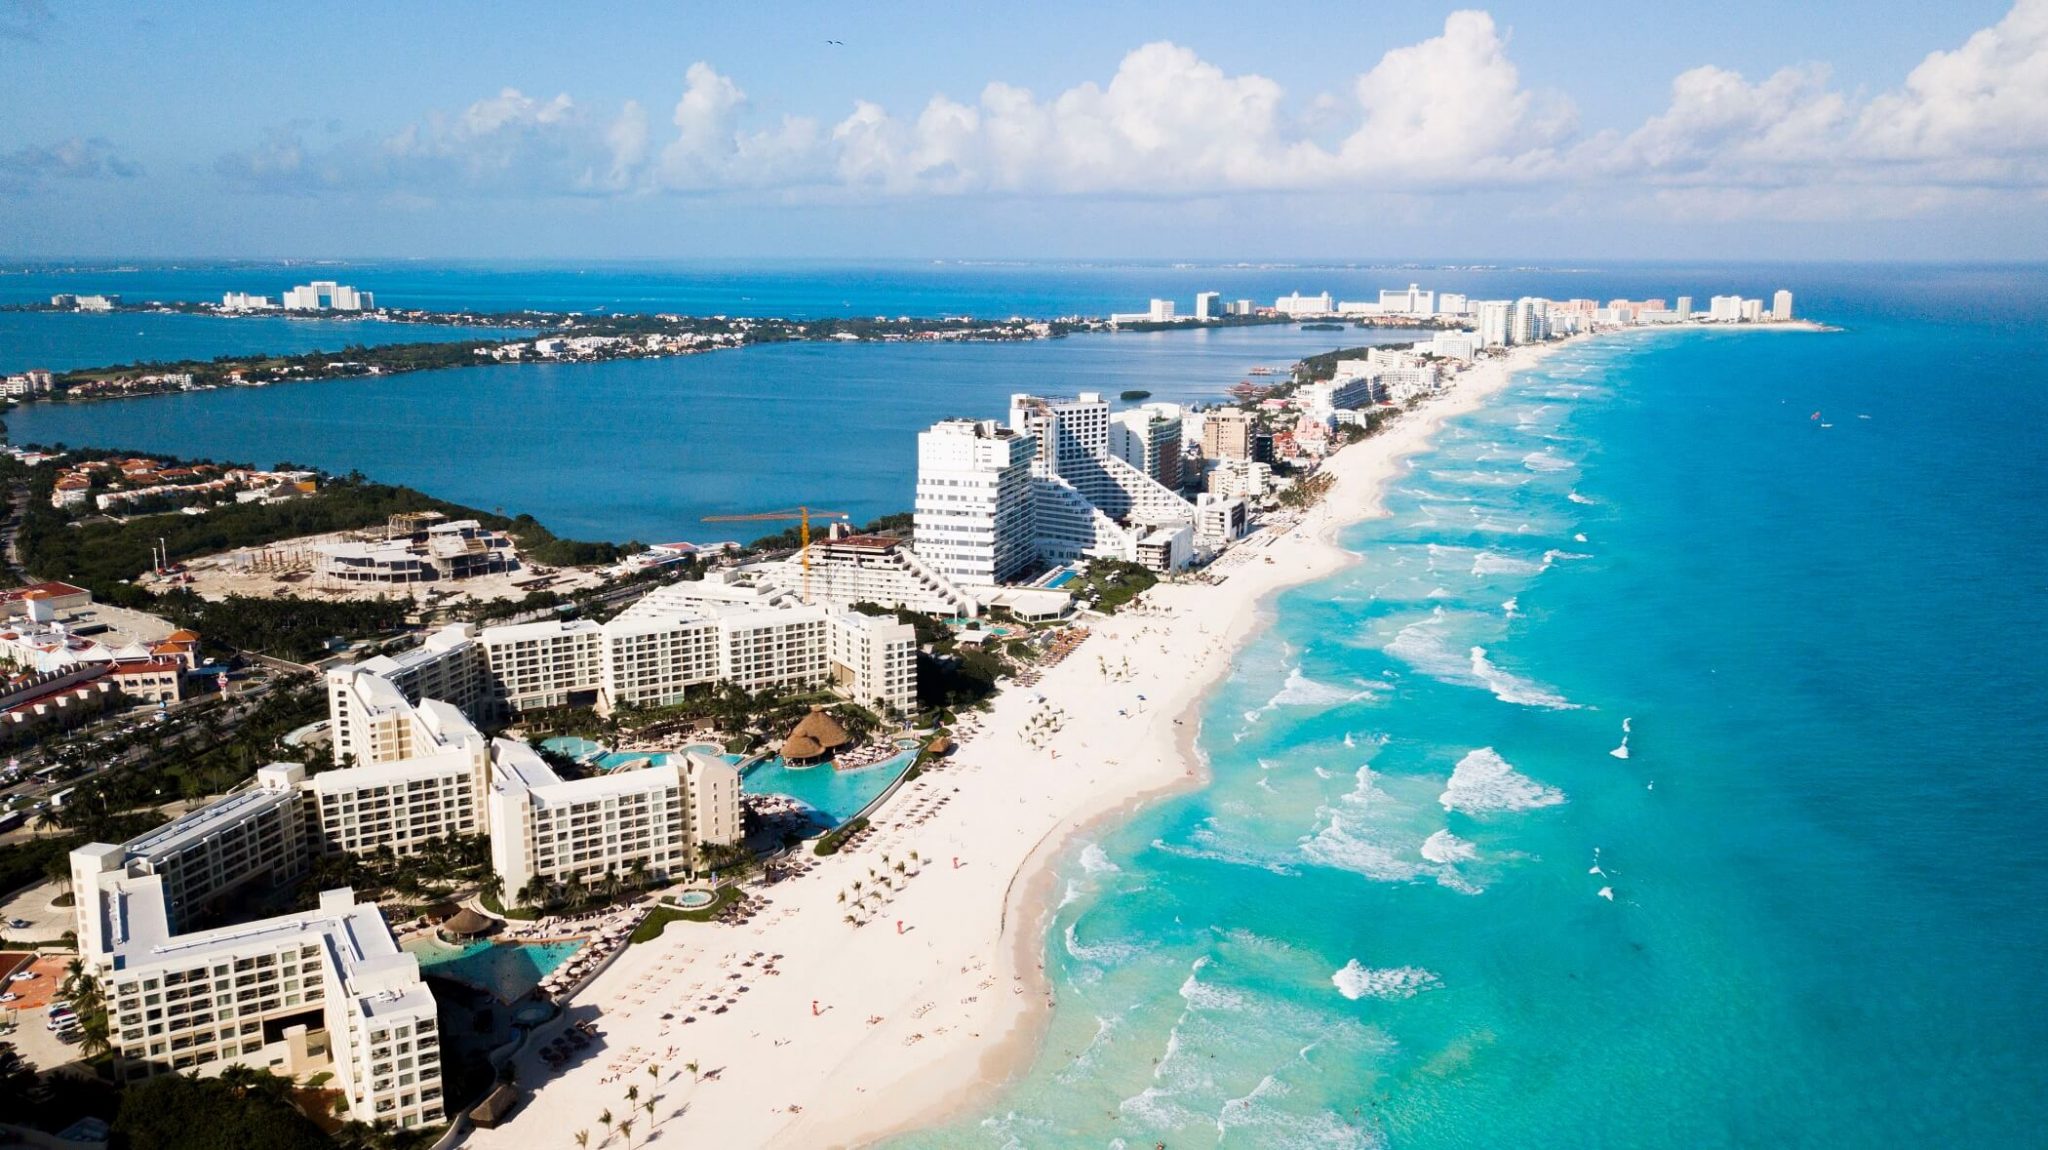 Best time to visit Cancun for nightlife.